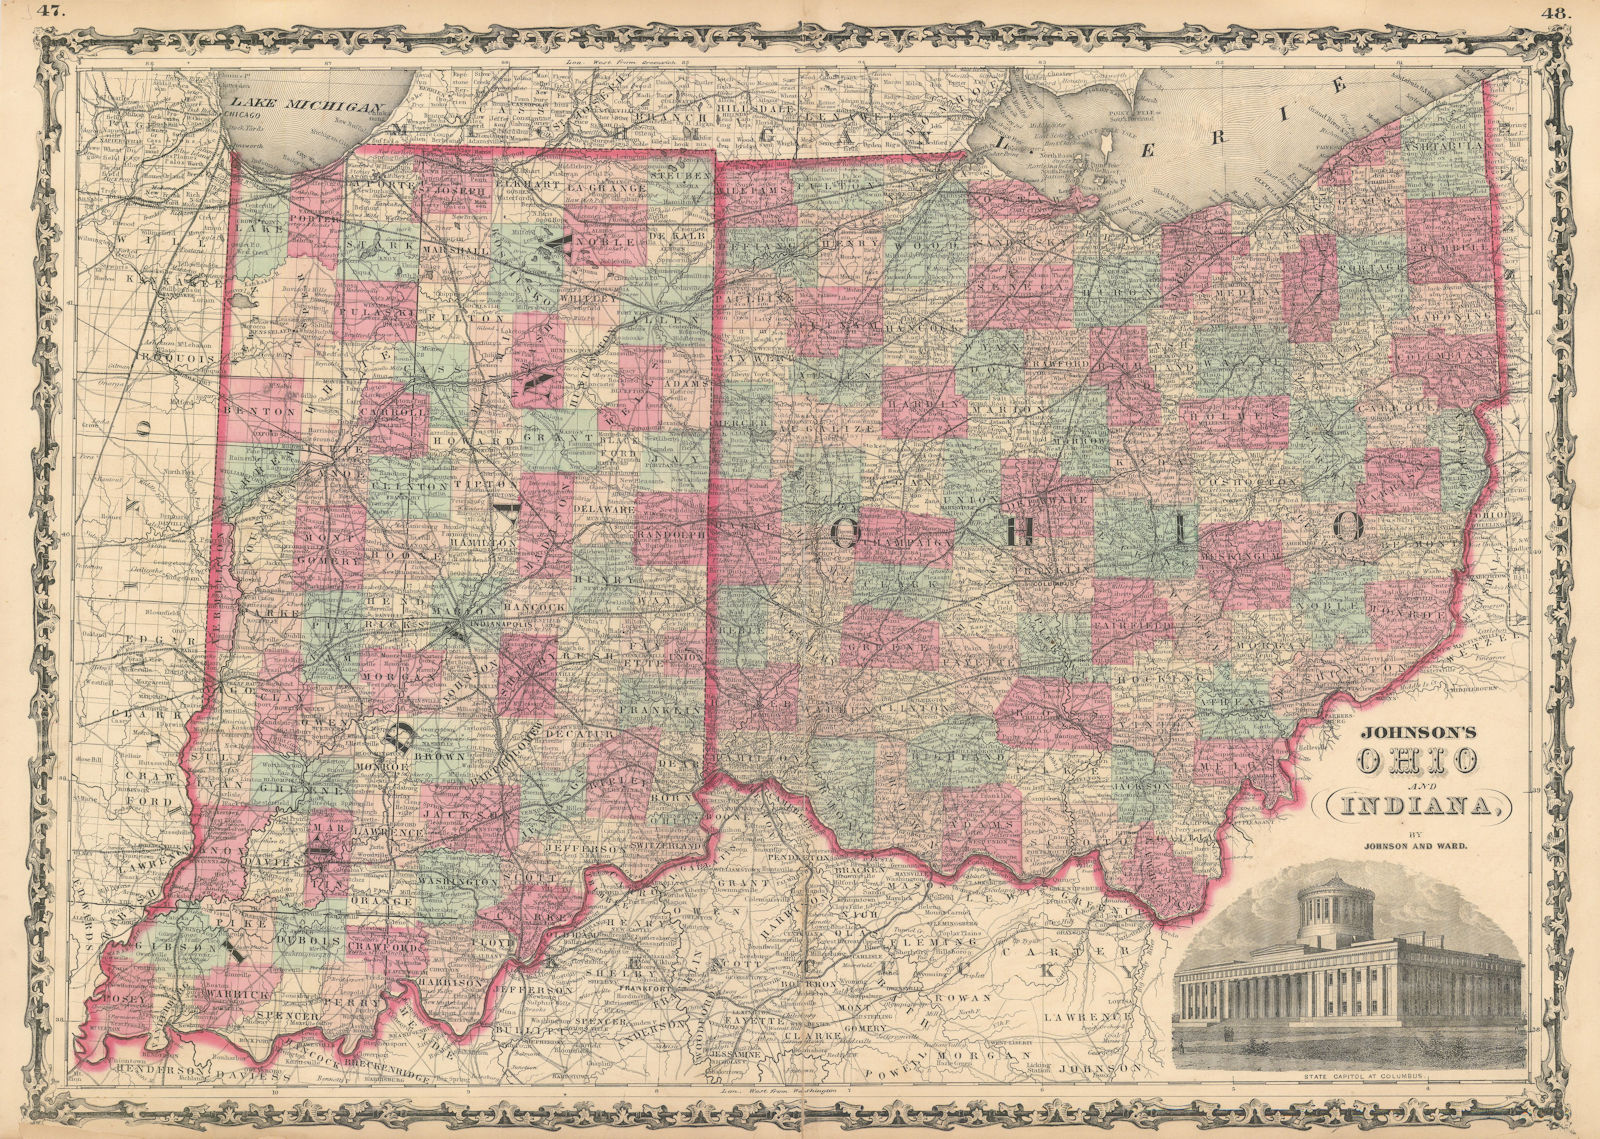 Johnson's Ohio & Indiana. US state map showing counties 1862 old antique